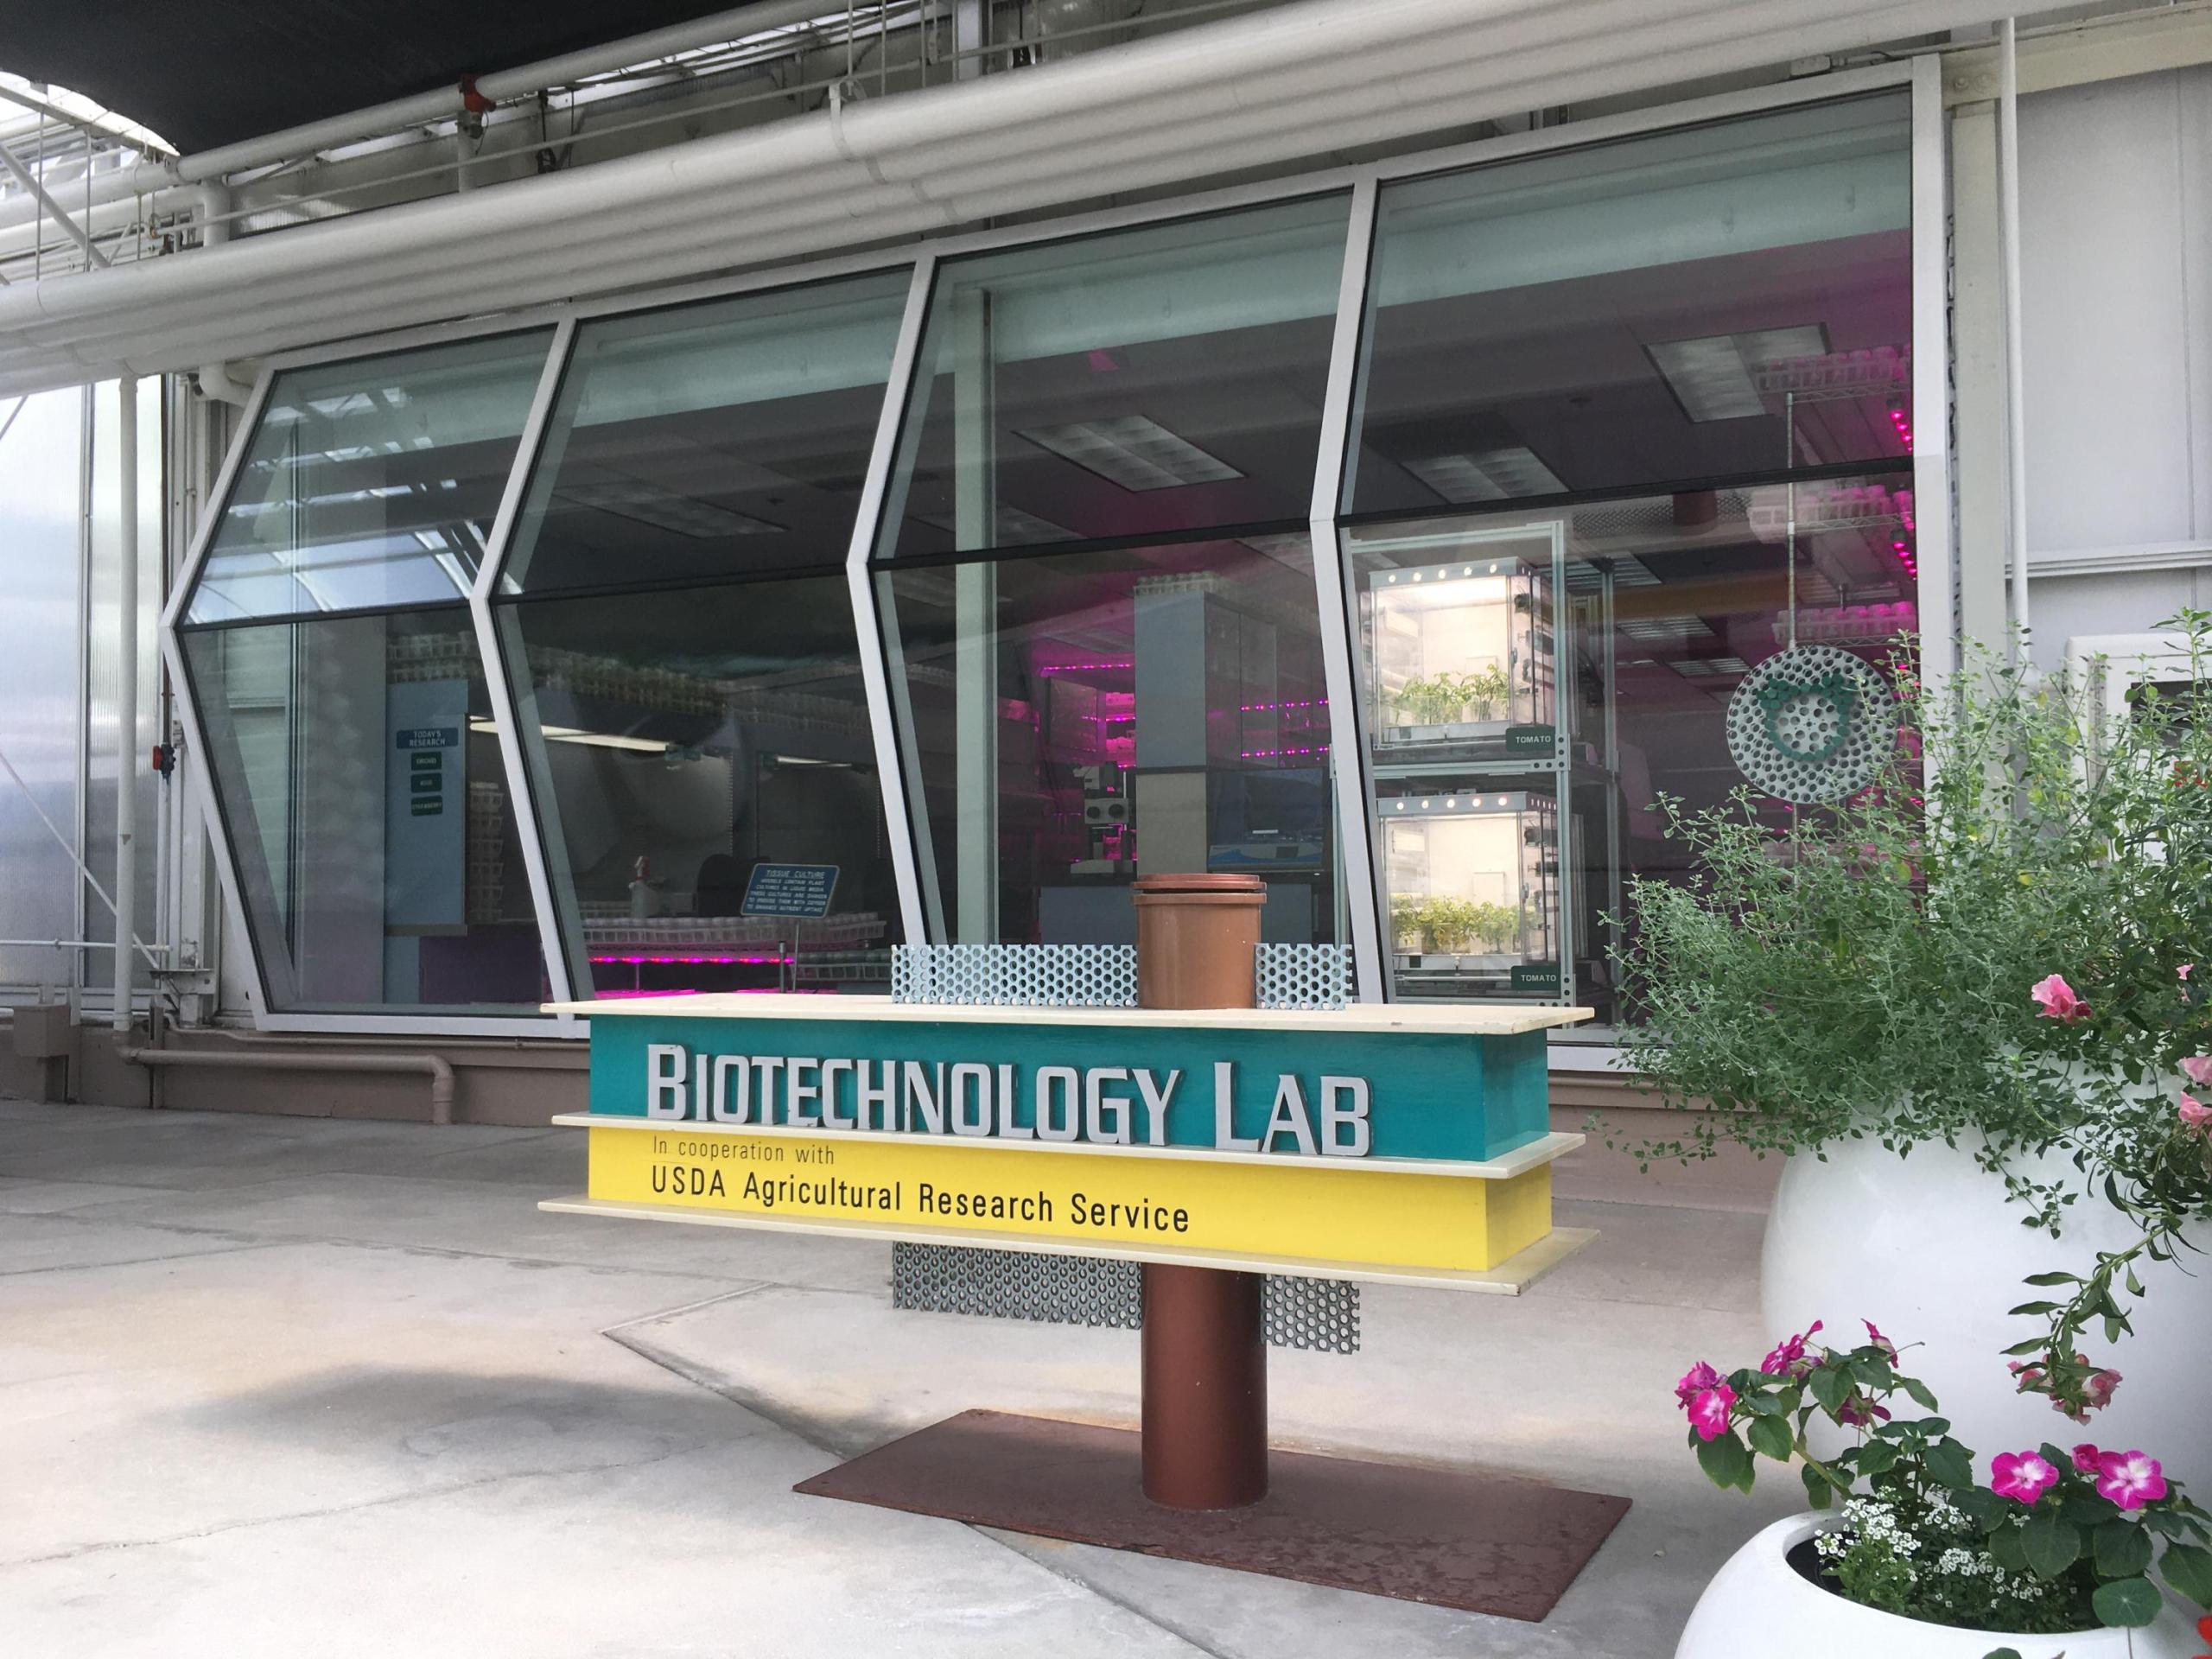 This image shows a teal and yellow sign that says “Biotechnology Lab In cooperation with USDA Agricultural Research Service.” To the right of the sign are several potted plants, and behind it are windows that give a glimpse into the inside of the lab. This includes two illuminated white squares stacked one over the other, which are plant growing chambers developed by NASA’s Biological and Physical Sciences Division at Kennedy Space Center.